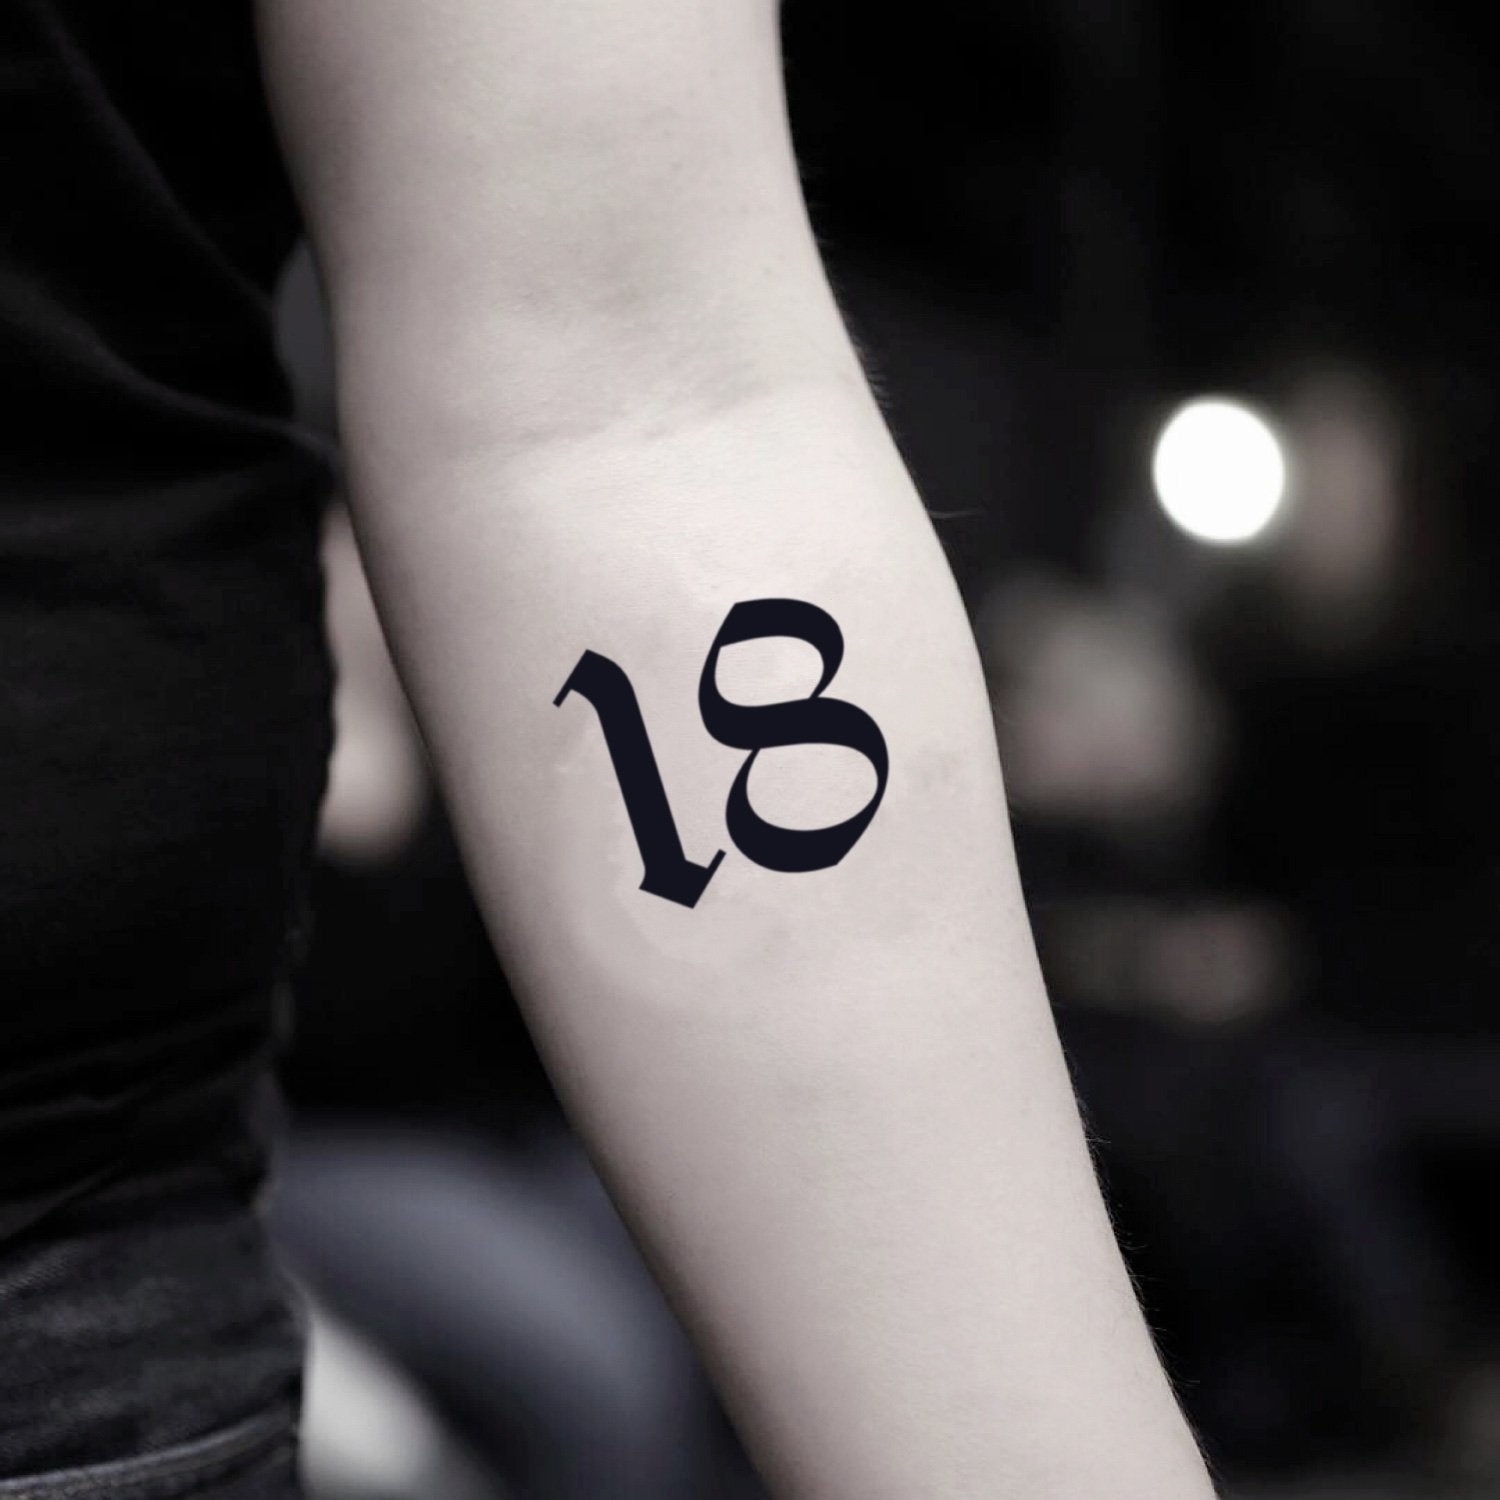 101 Amazing Number Tattoo Ideas You Need to See! | Number 13 tattoos, 13  tattoos, Tattoos for guys